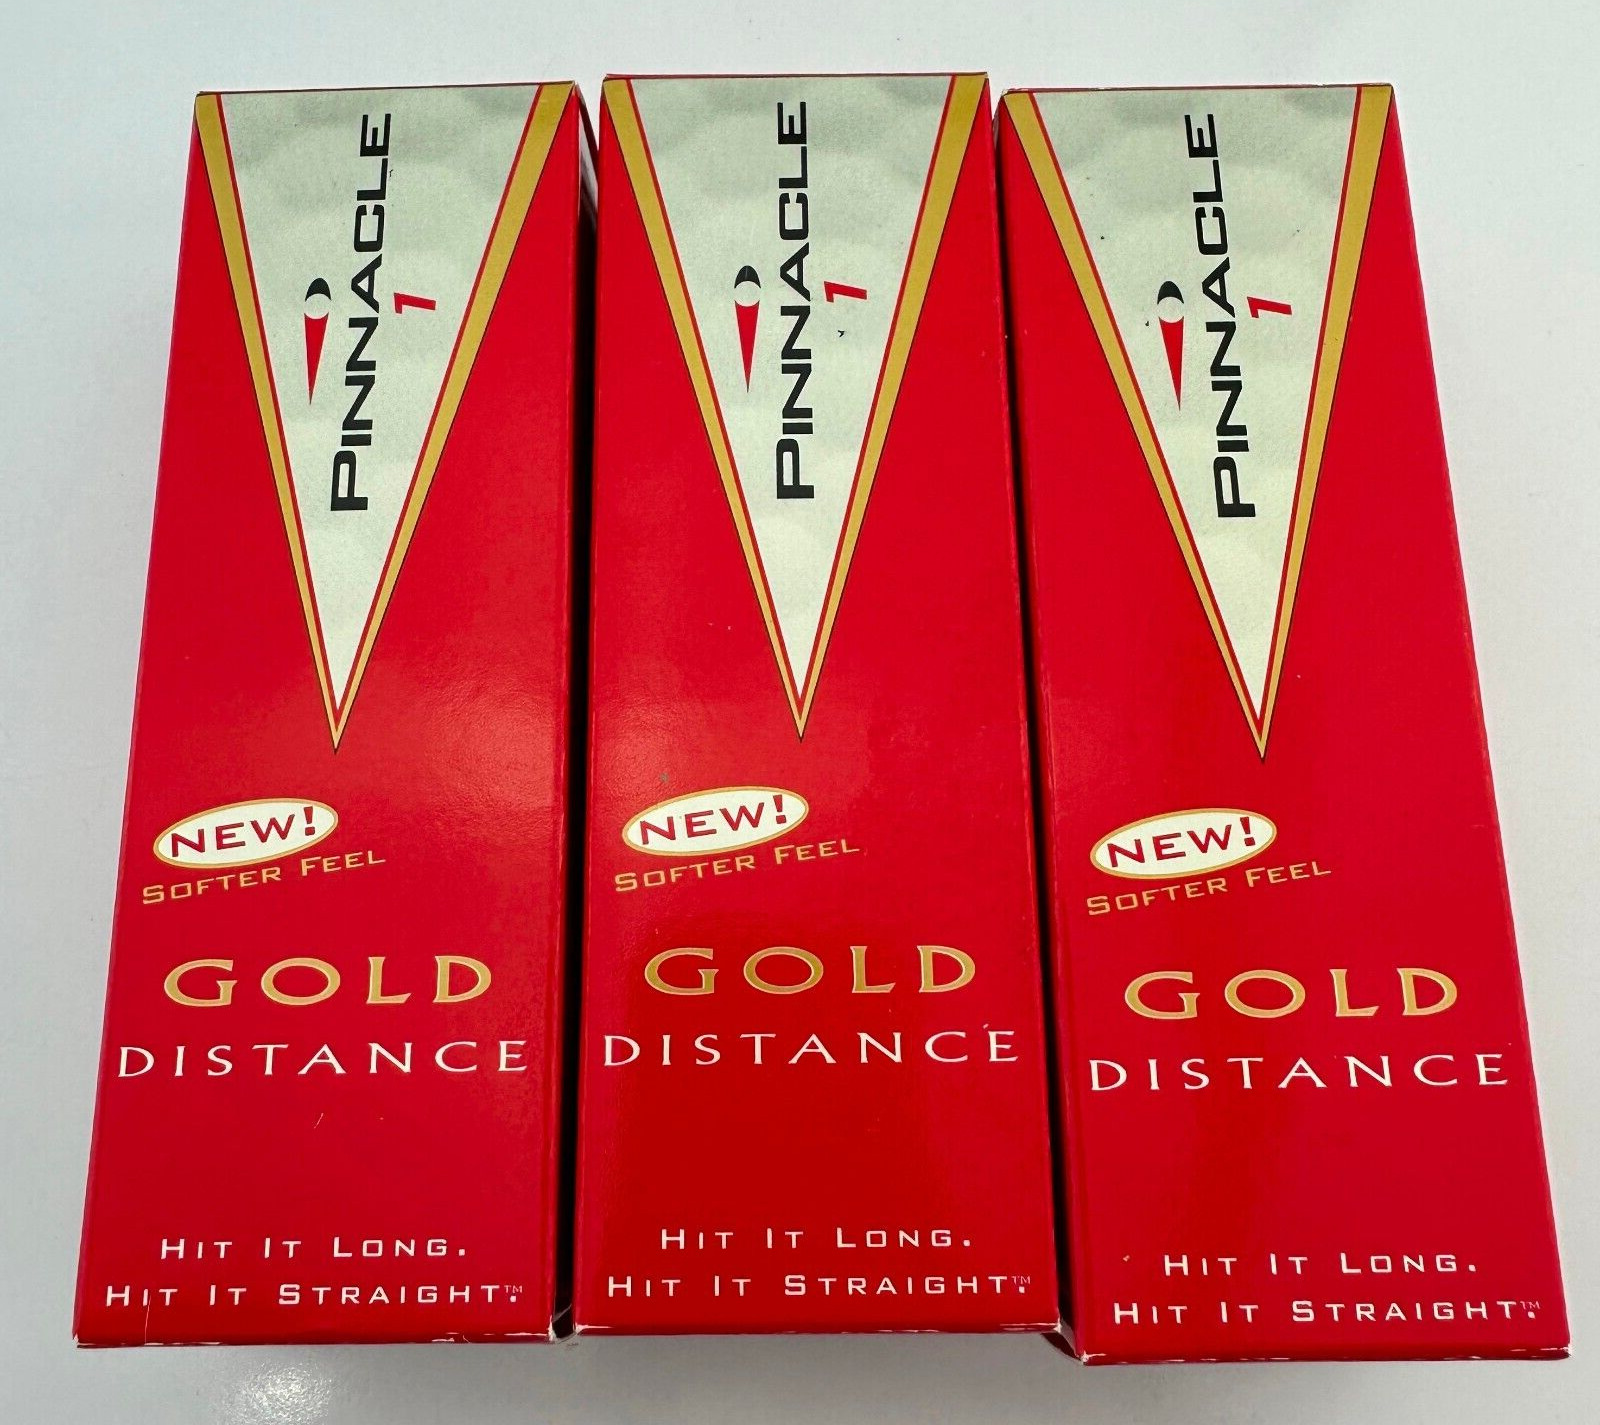 Pinnacle Gold Distance Golf Ball (3) 3 Packs (9 total) New in Box. Made in USA